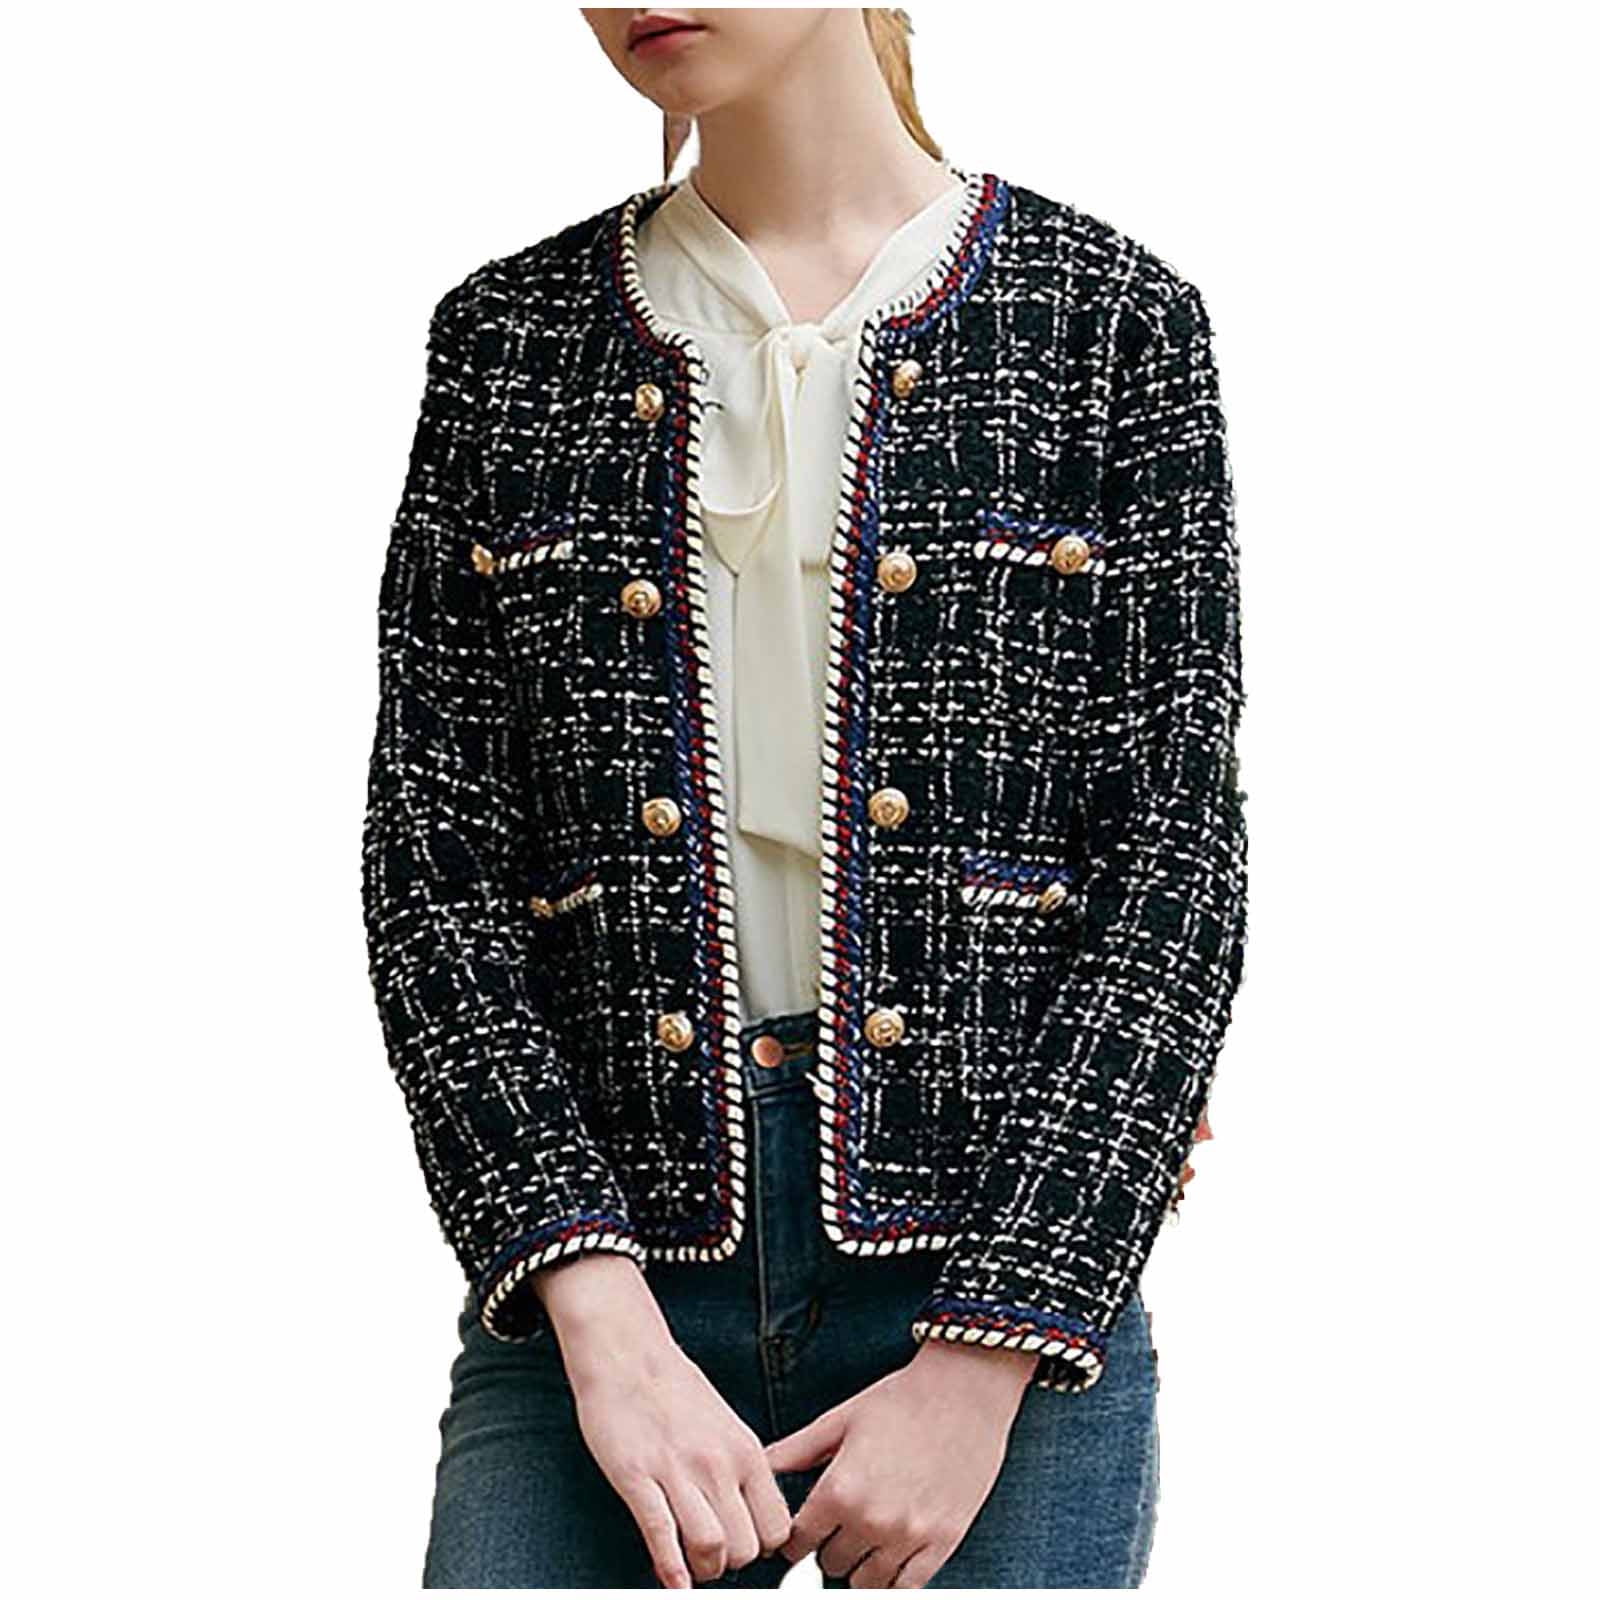 Chanel Double-Breasted Tweed Jacket in Blue, Black, Silver & Gold